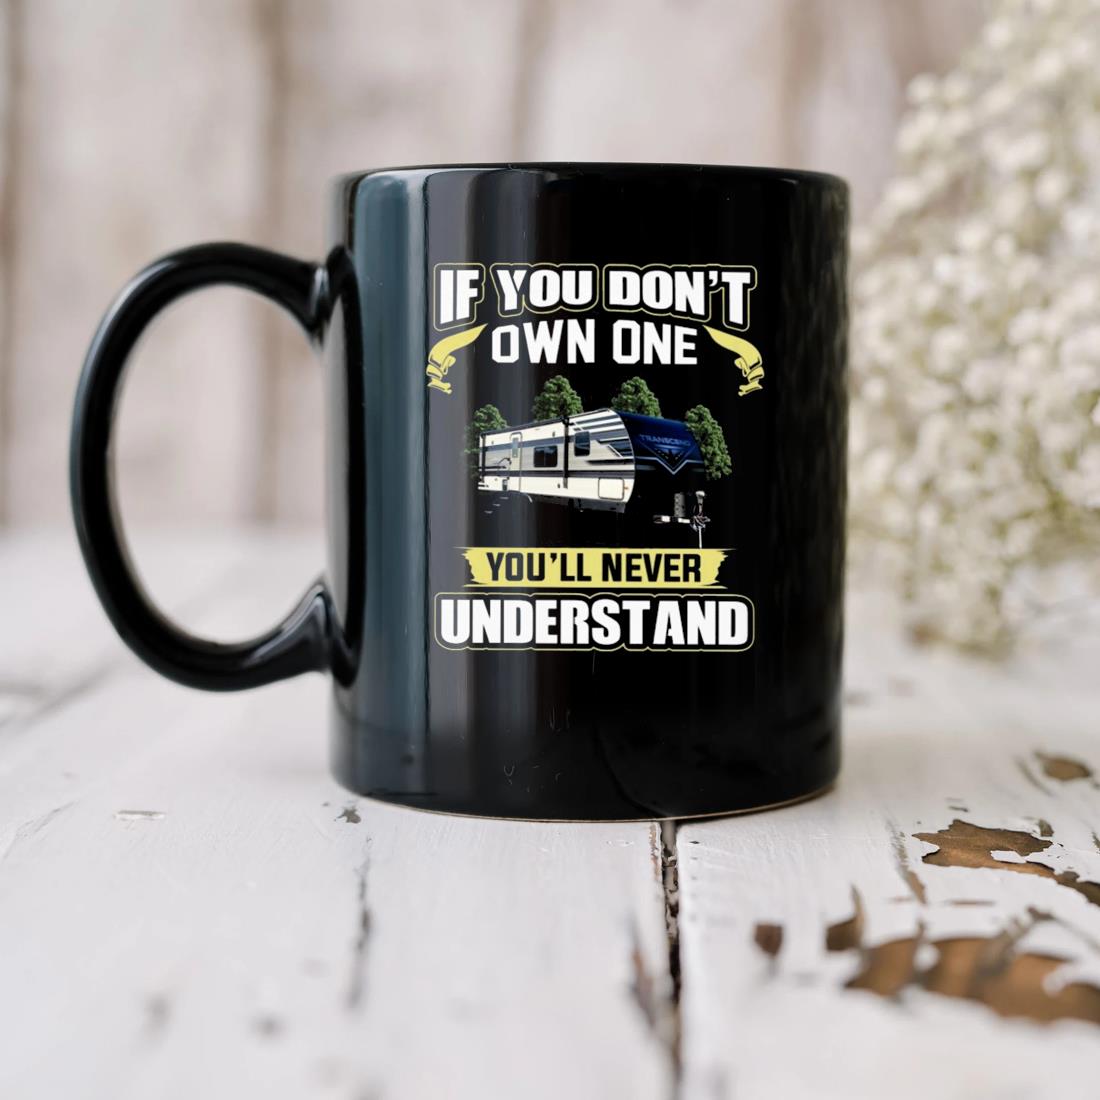 If You Don't Own One You'll Never Understand Mug